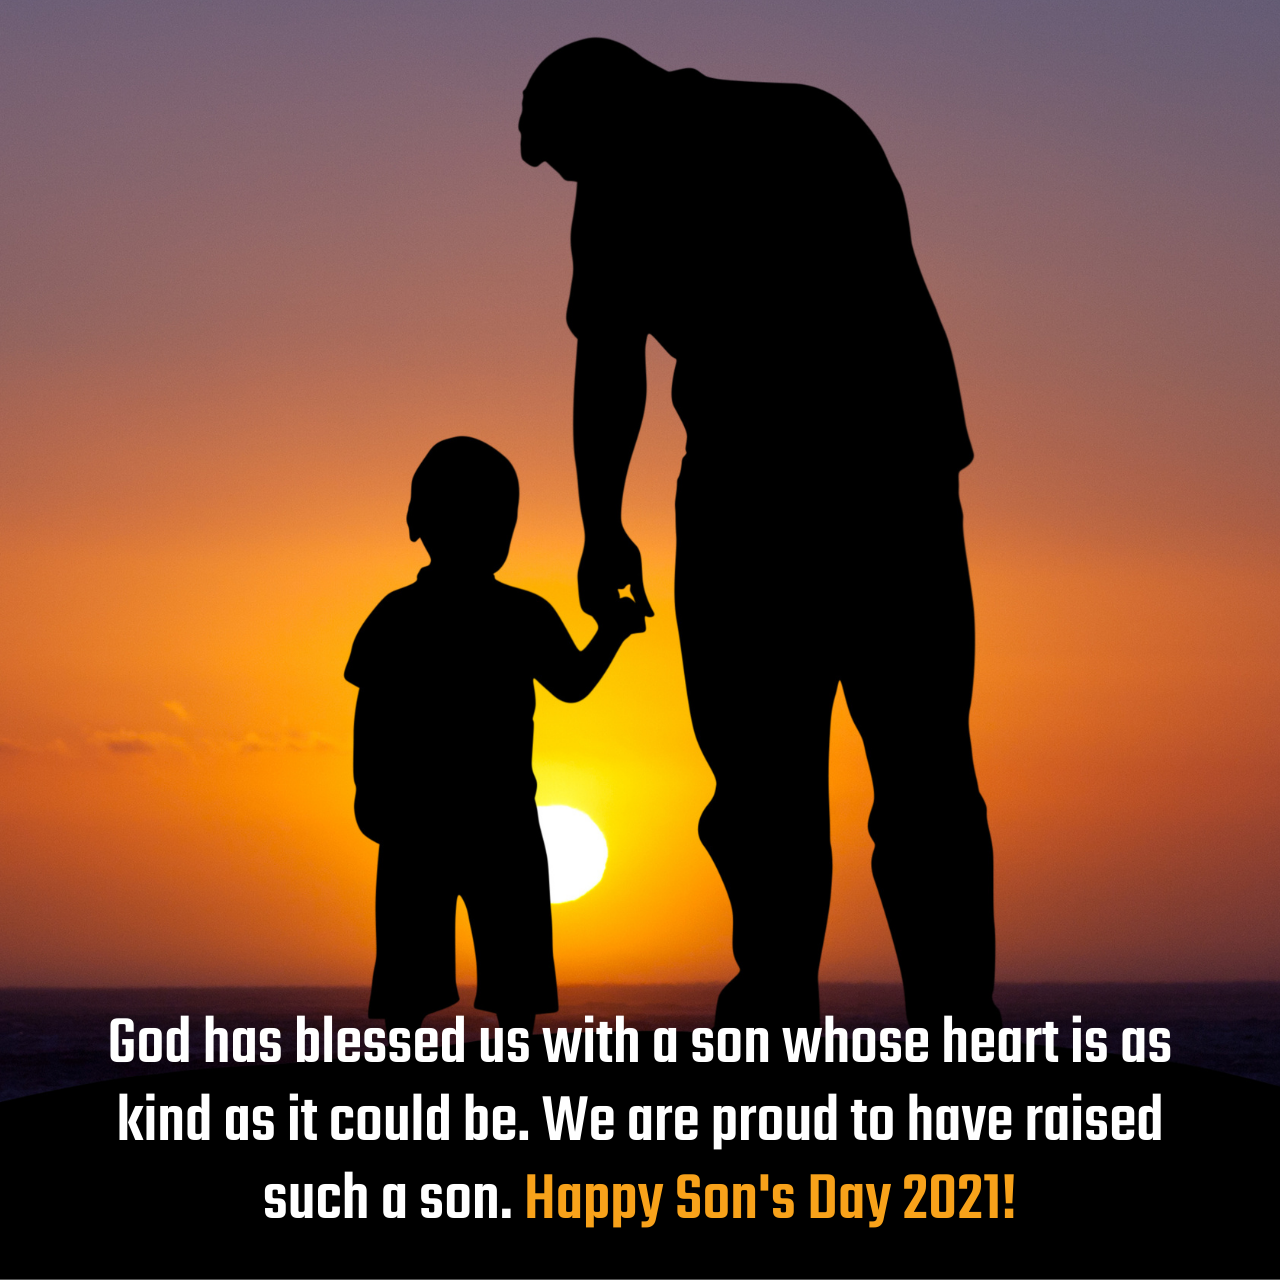 National Son's Day (US) 2021 Wishes, Quotes, Greetings, Sayings ...